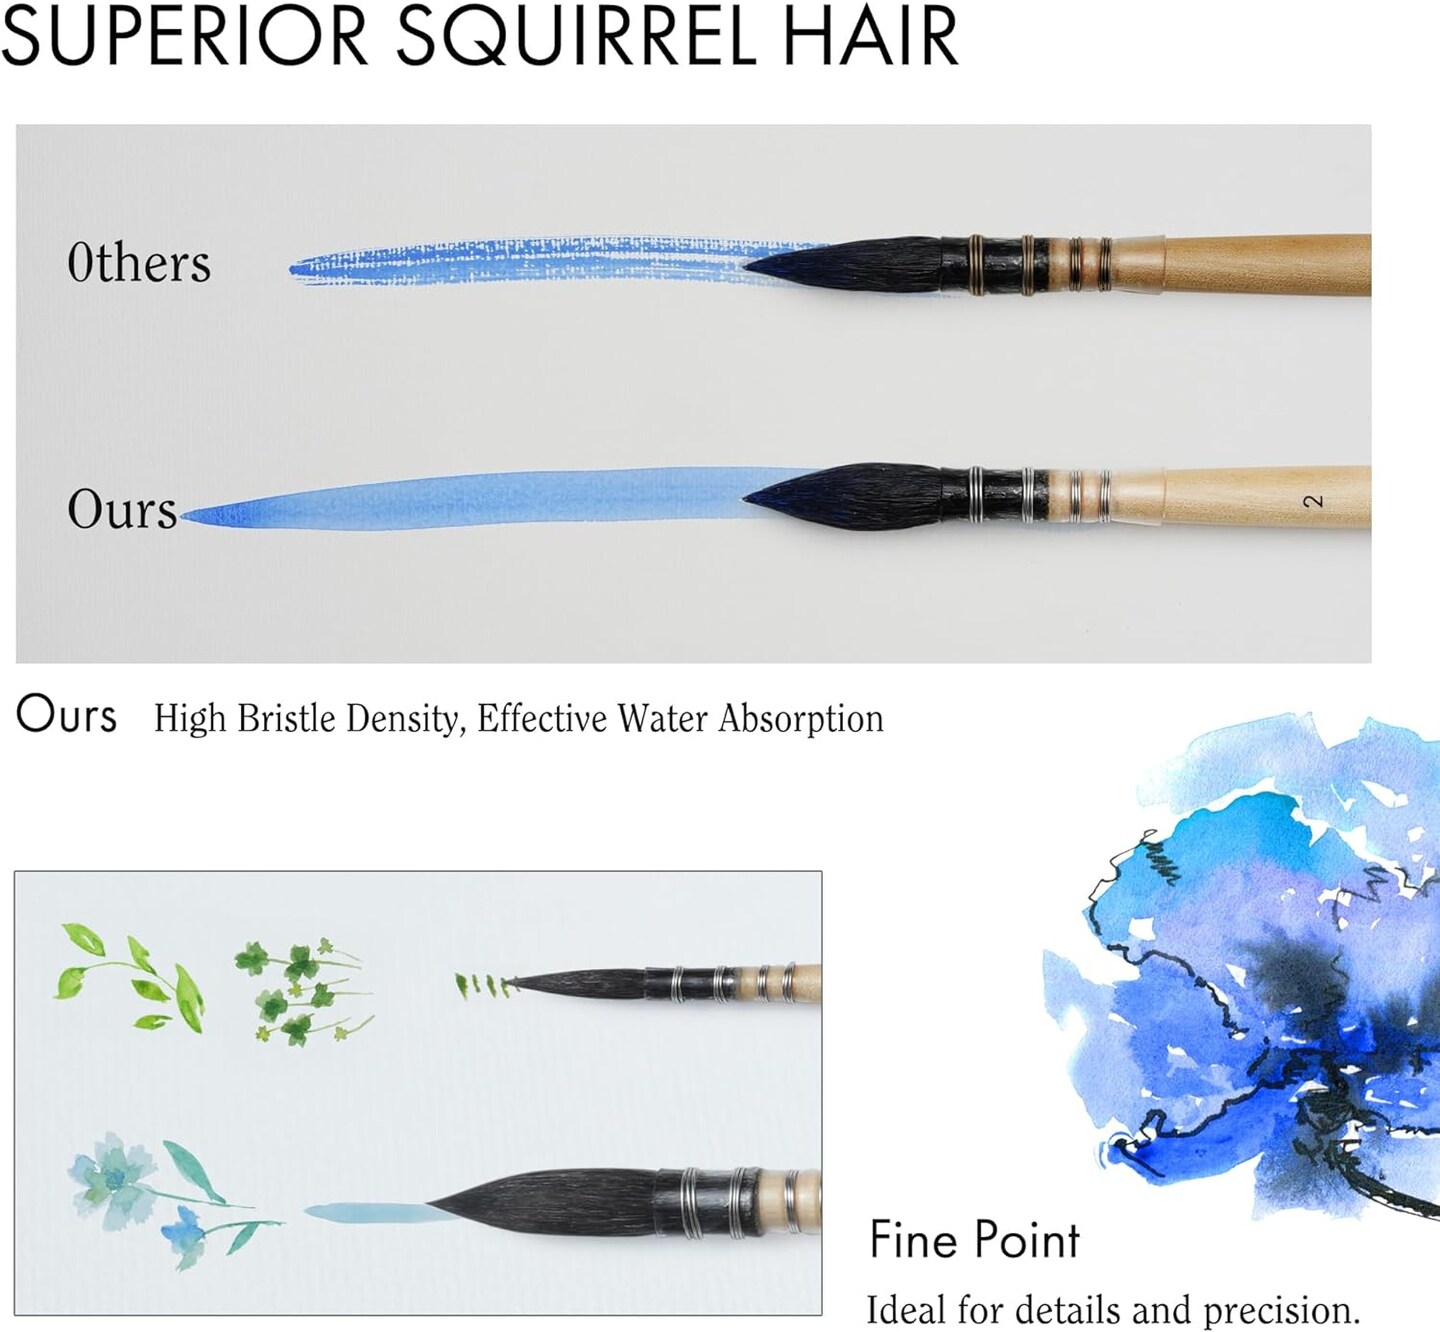 ARTIFY 3PCS Professional Natural Squirrel Hair Quill Watercolor Brushes | Mop Round Fine Tip Detail Watercolor Paint Brush Set | Ideal for Watercolor and Gouache Painting | Sizes #0, 2, 4